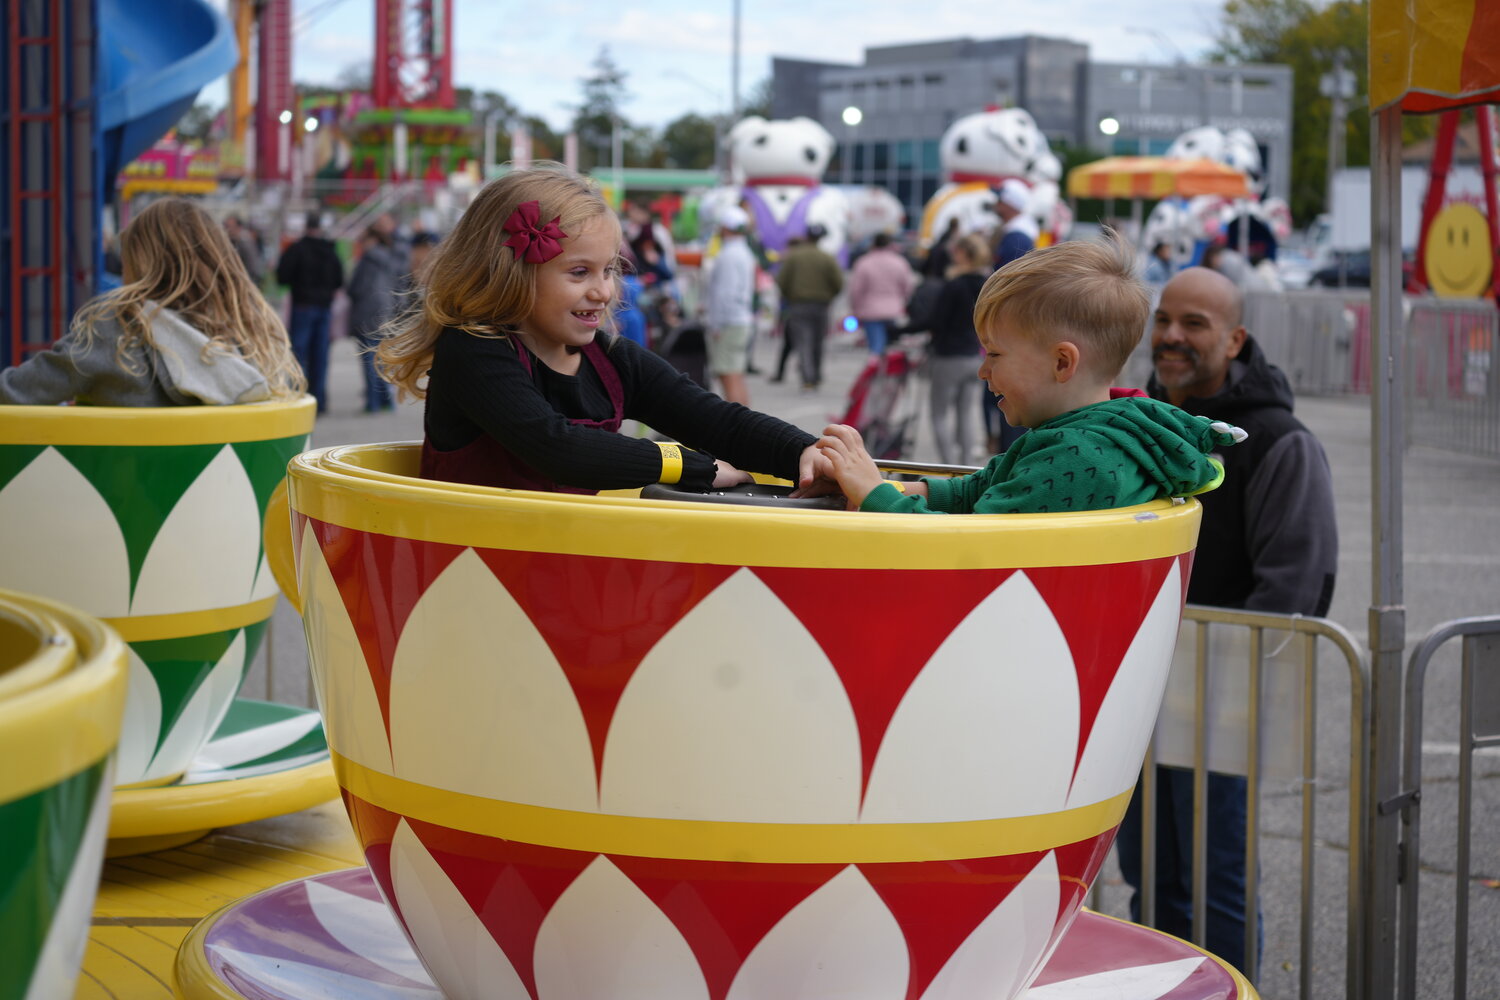 Over at the carnival, Grace Hughes and Brian Hughes, 6 and 3, had a blast riding the teacups.